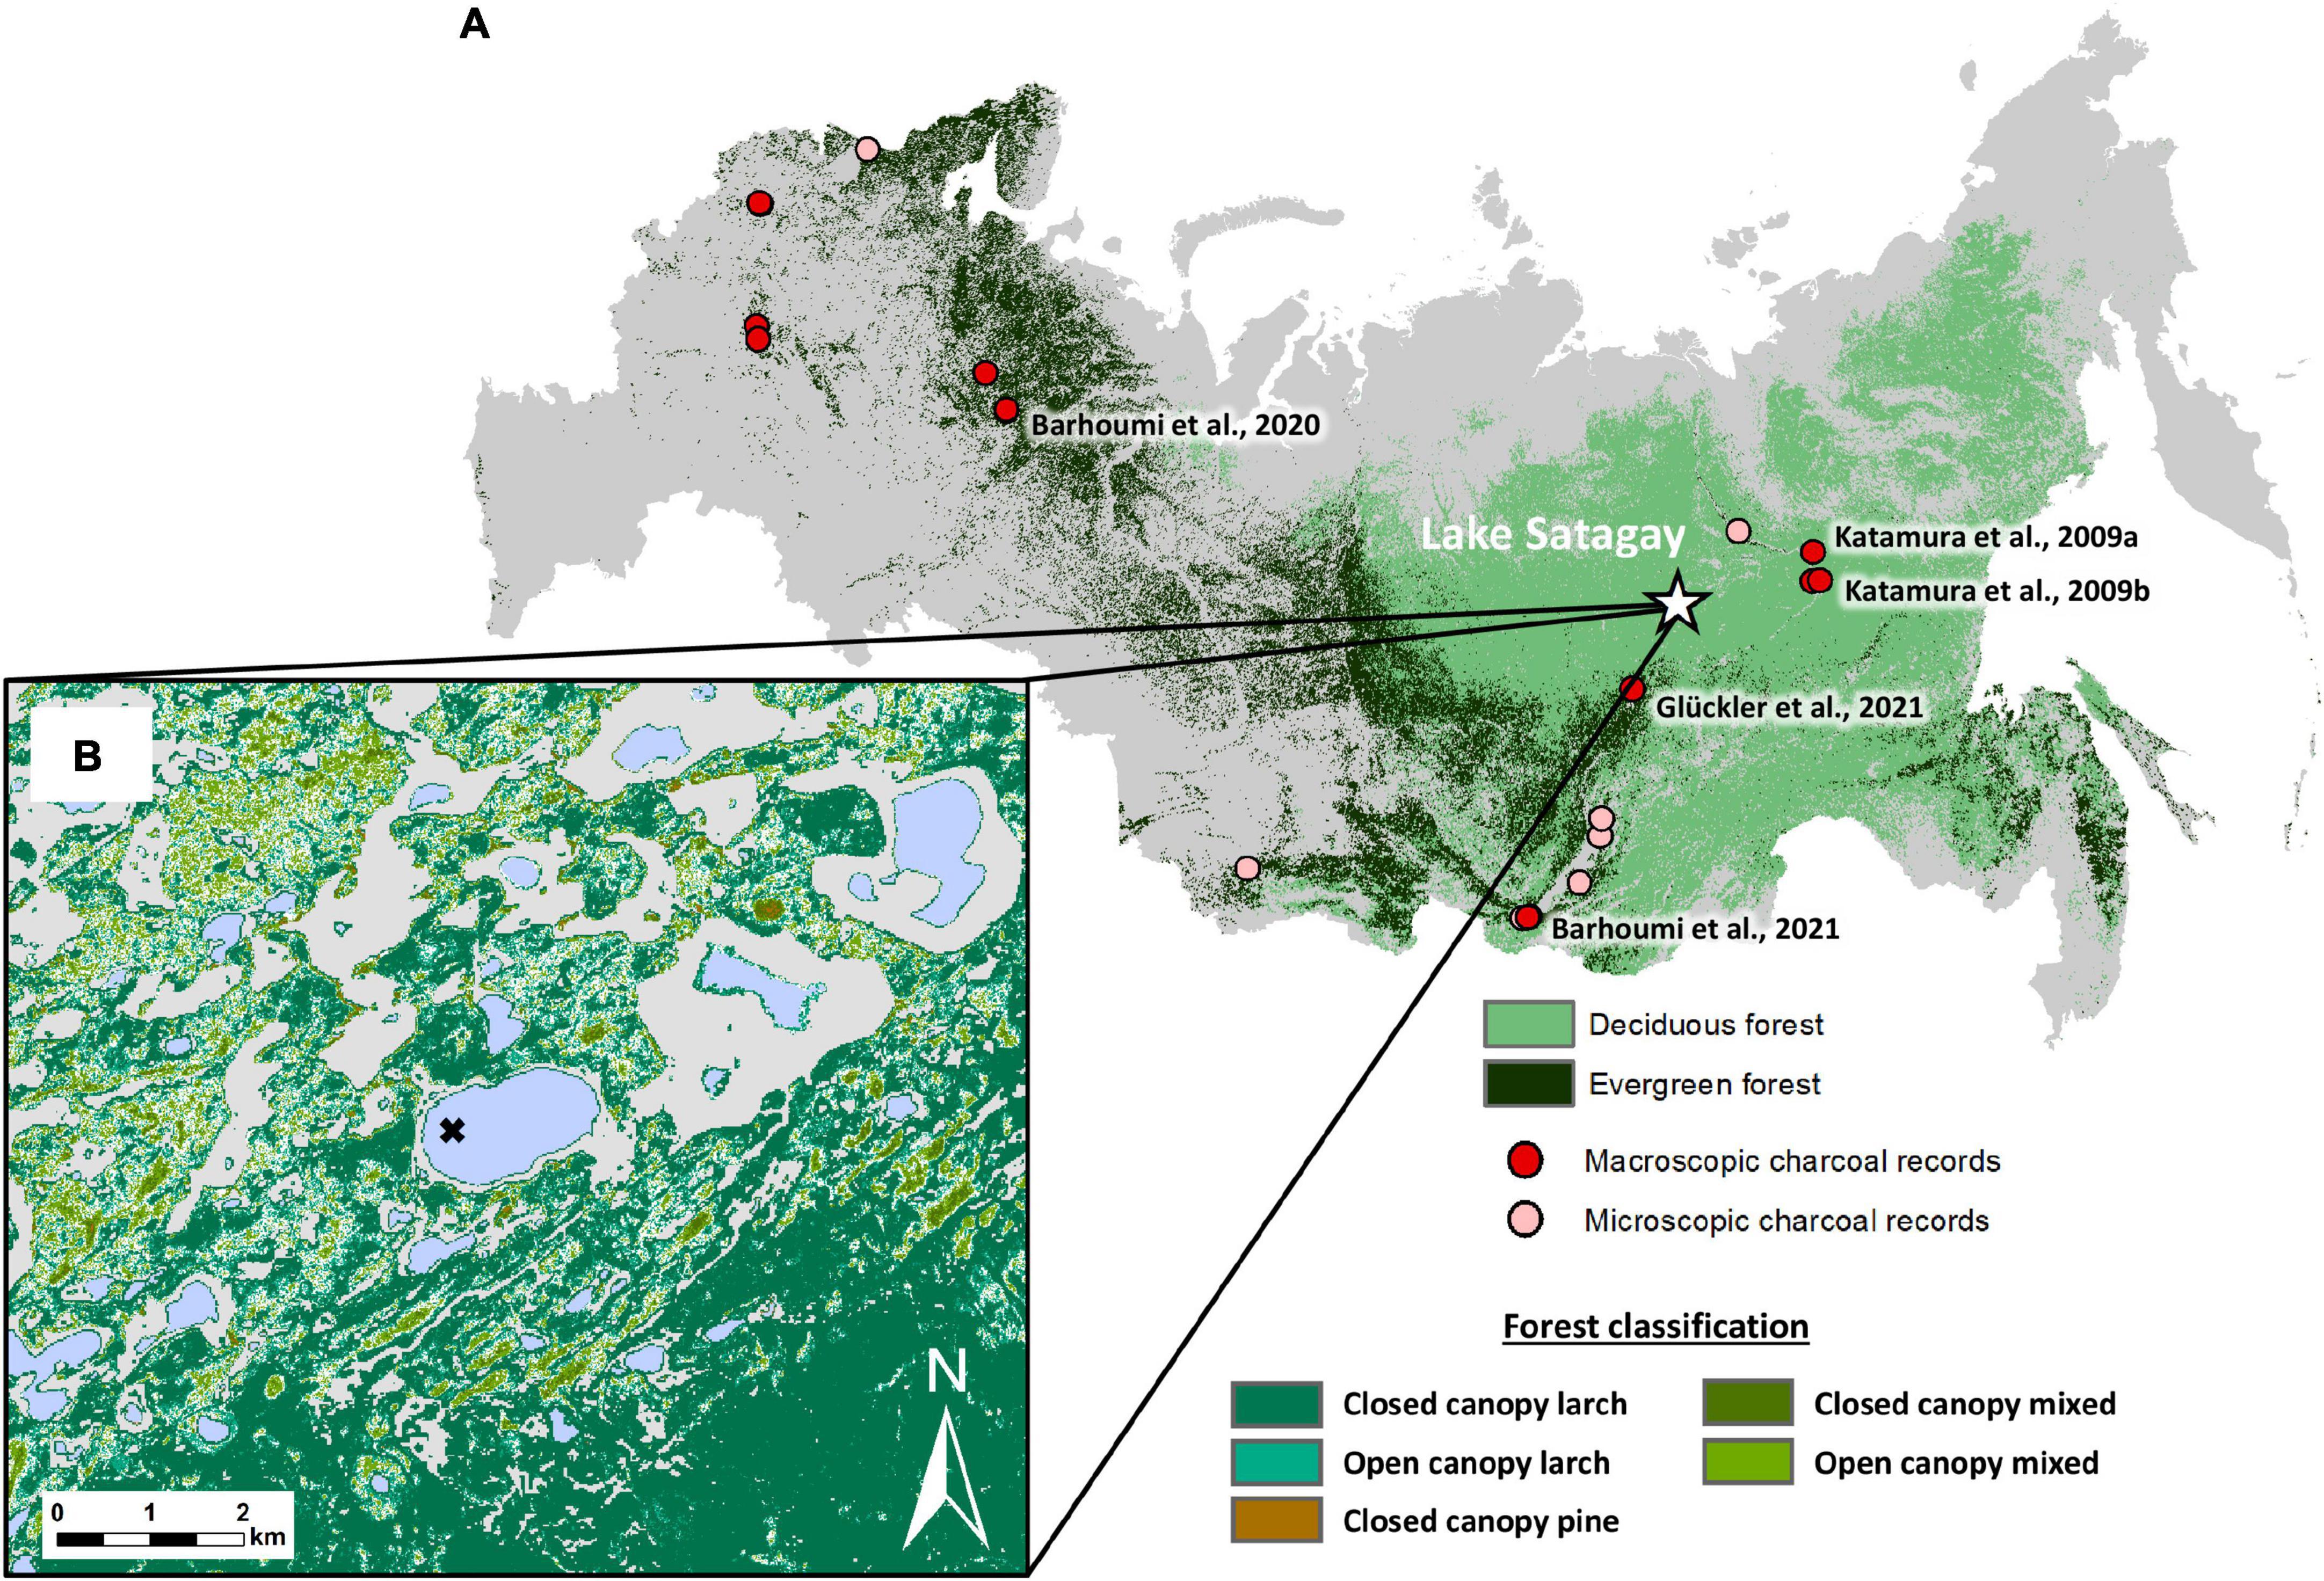 Canada's Boreal Forests Badly Damaged by Logging - The New York Times